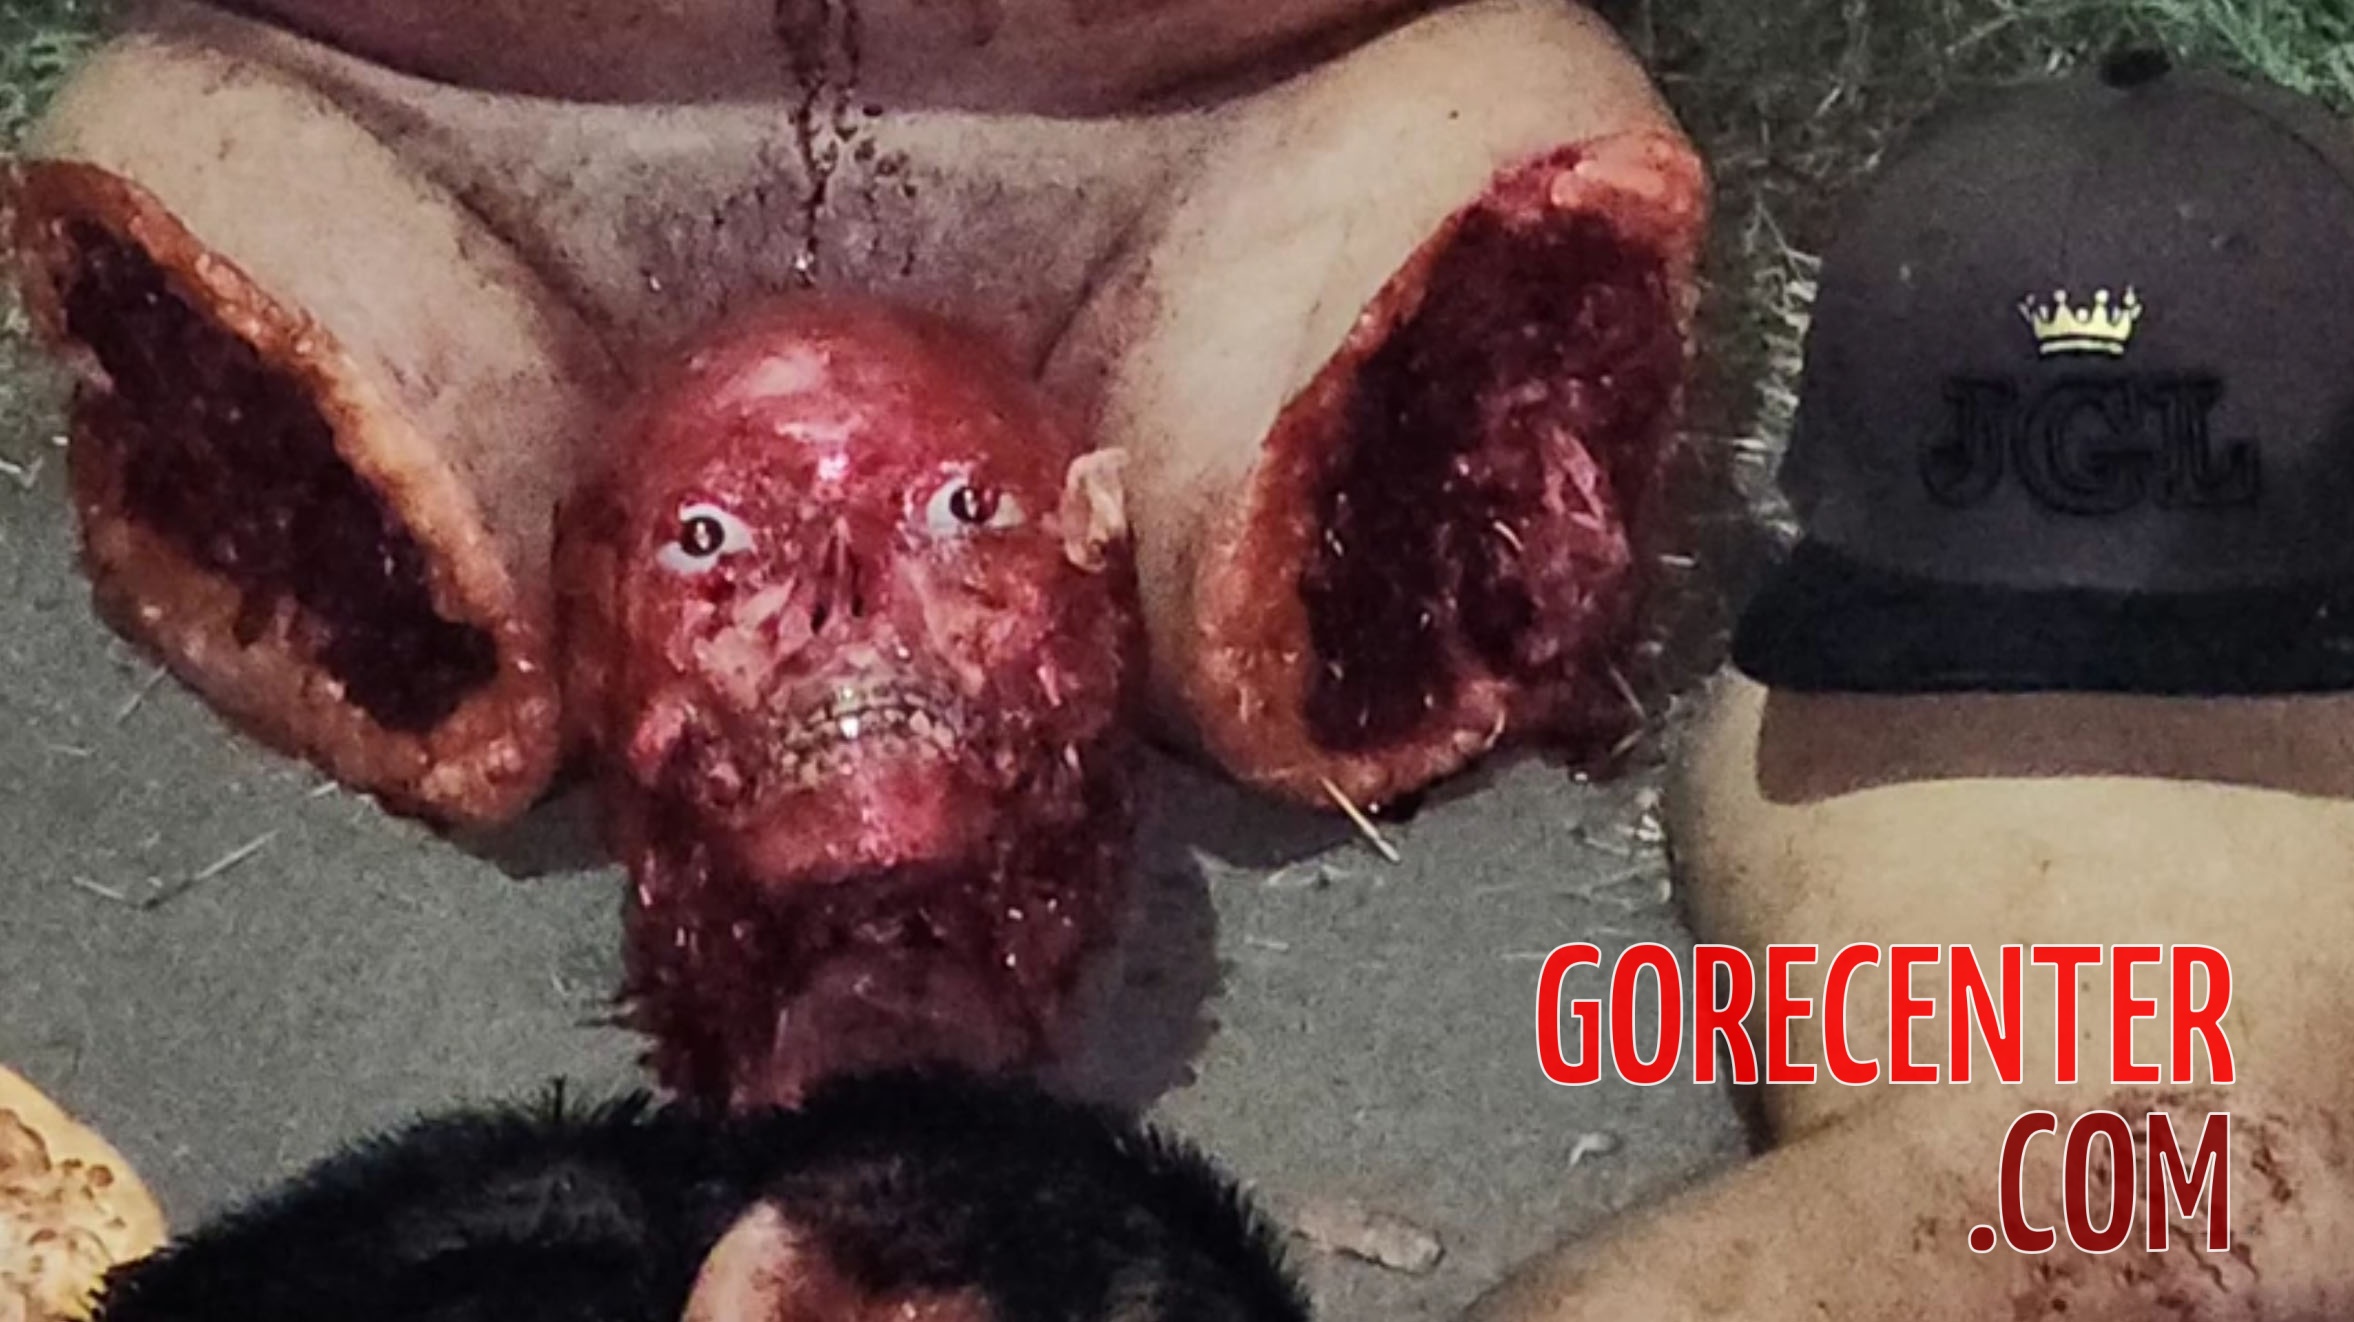 Man Dismembered By Cartel And Dumped On The Street GoreCenter